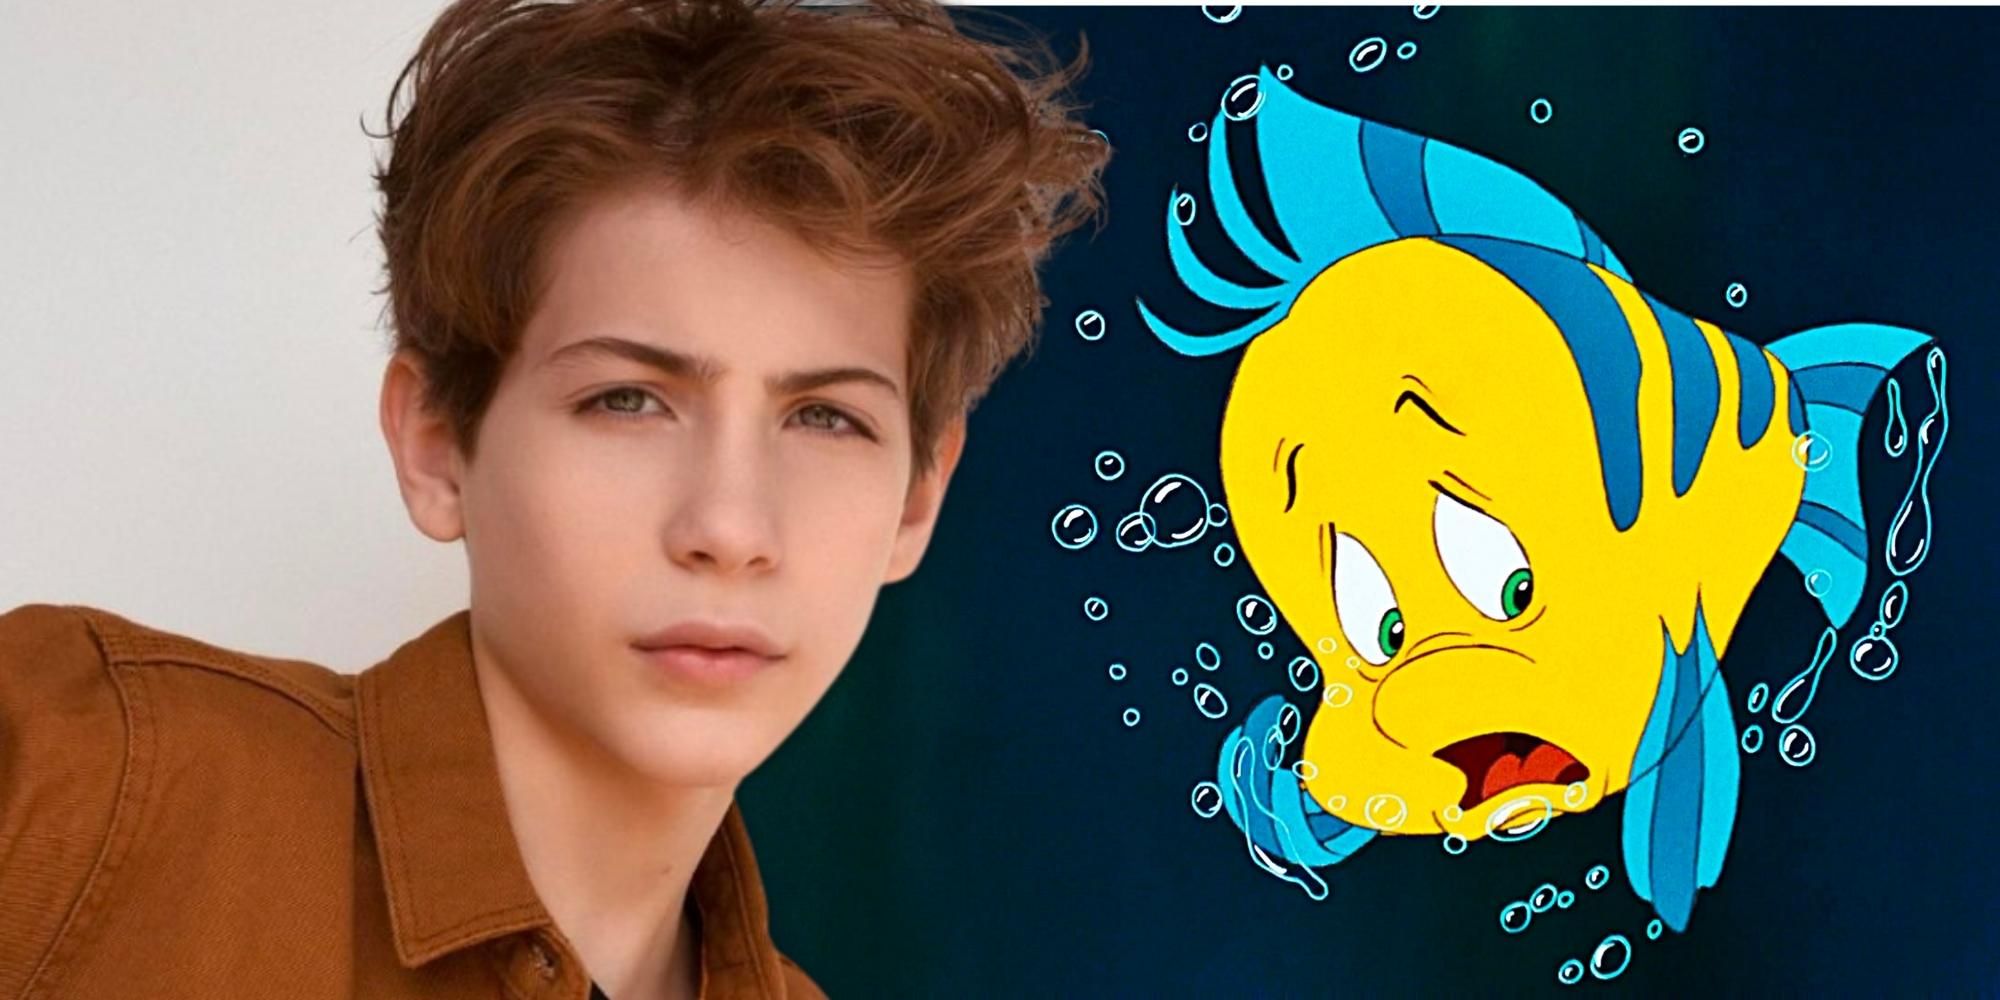 Jacob Tremblay in from of a still of Flounder from the Disney animated film the Little Mermaid